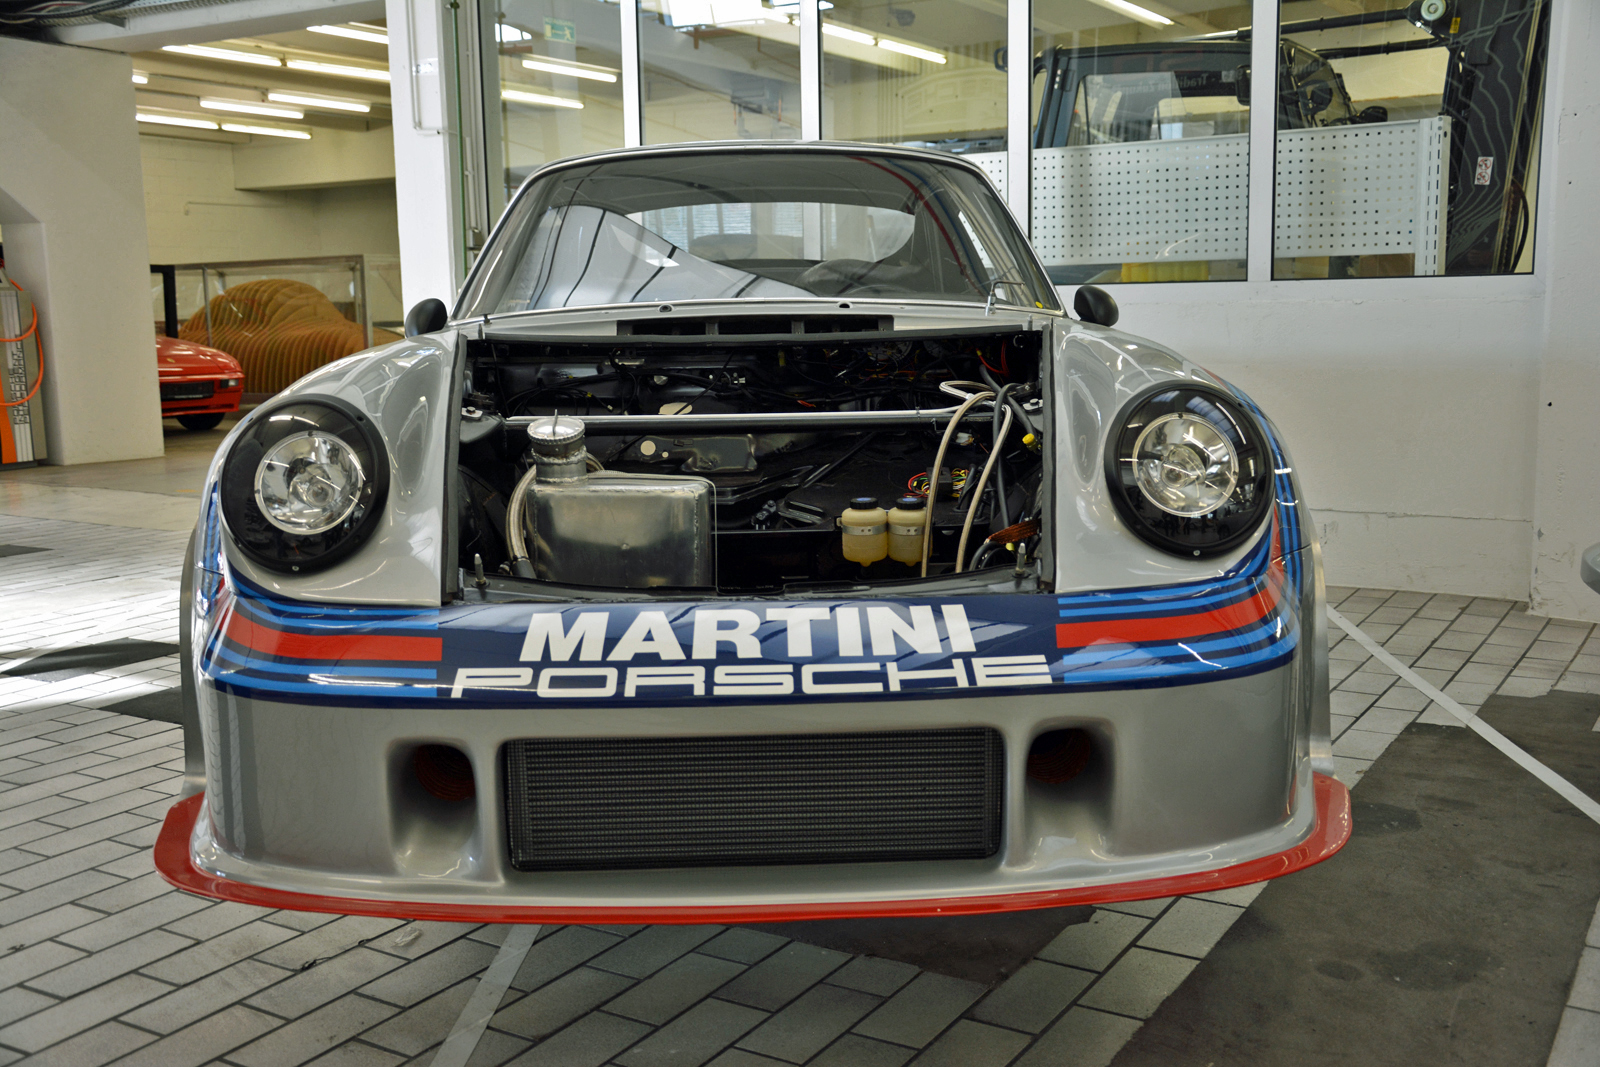 <p>Porsche created the winged, wide-bodied Carrera RSR Turbo 2.1 to illustrate the benefits of turbocharging a 911. Forced induction bumped the 2.1-liter flat-six’s output from 300 to over <strong>460 hp</strong>. Scores of fans lined the Le Mans track in 1974 to see the RSR belch out flames as it sped past. The first car dropped out eight hours into the race, but the second one finished in second place.</p>